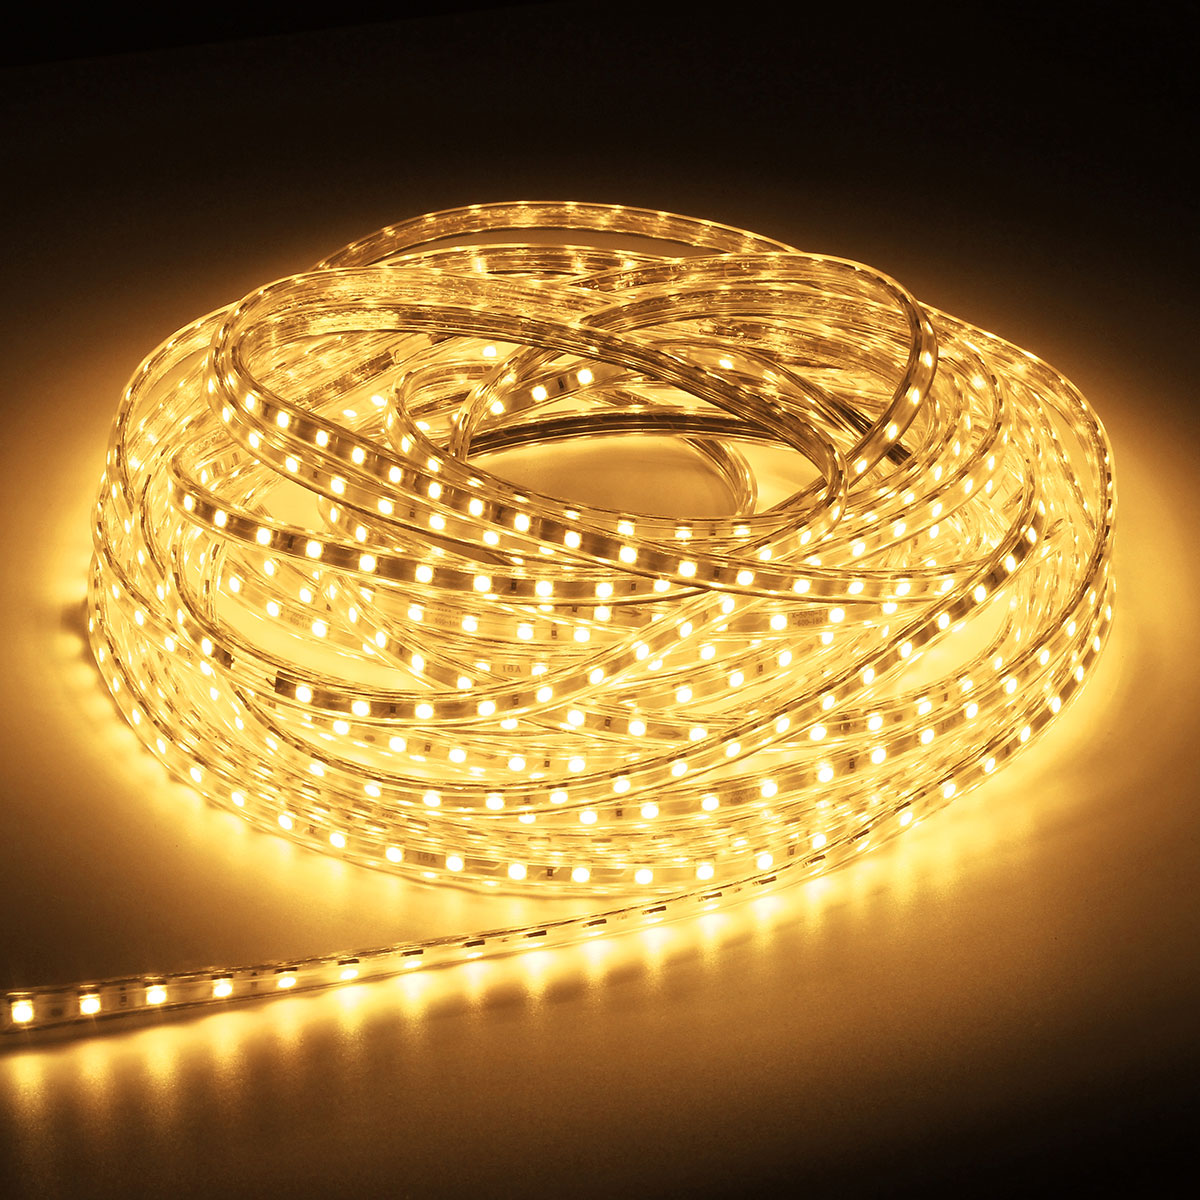 220V-14M-5050-LED-SMD-Outdoor-Waterproof-Flexible-Tape-Rope-Strip-Light-Xmas-1066375-6